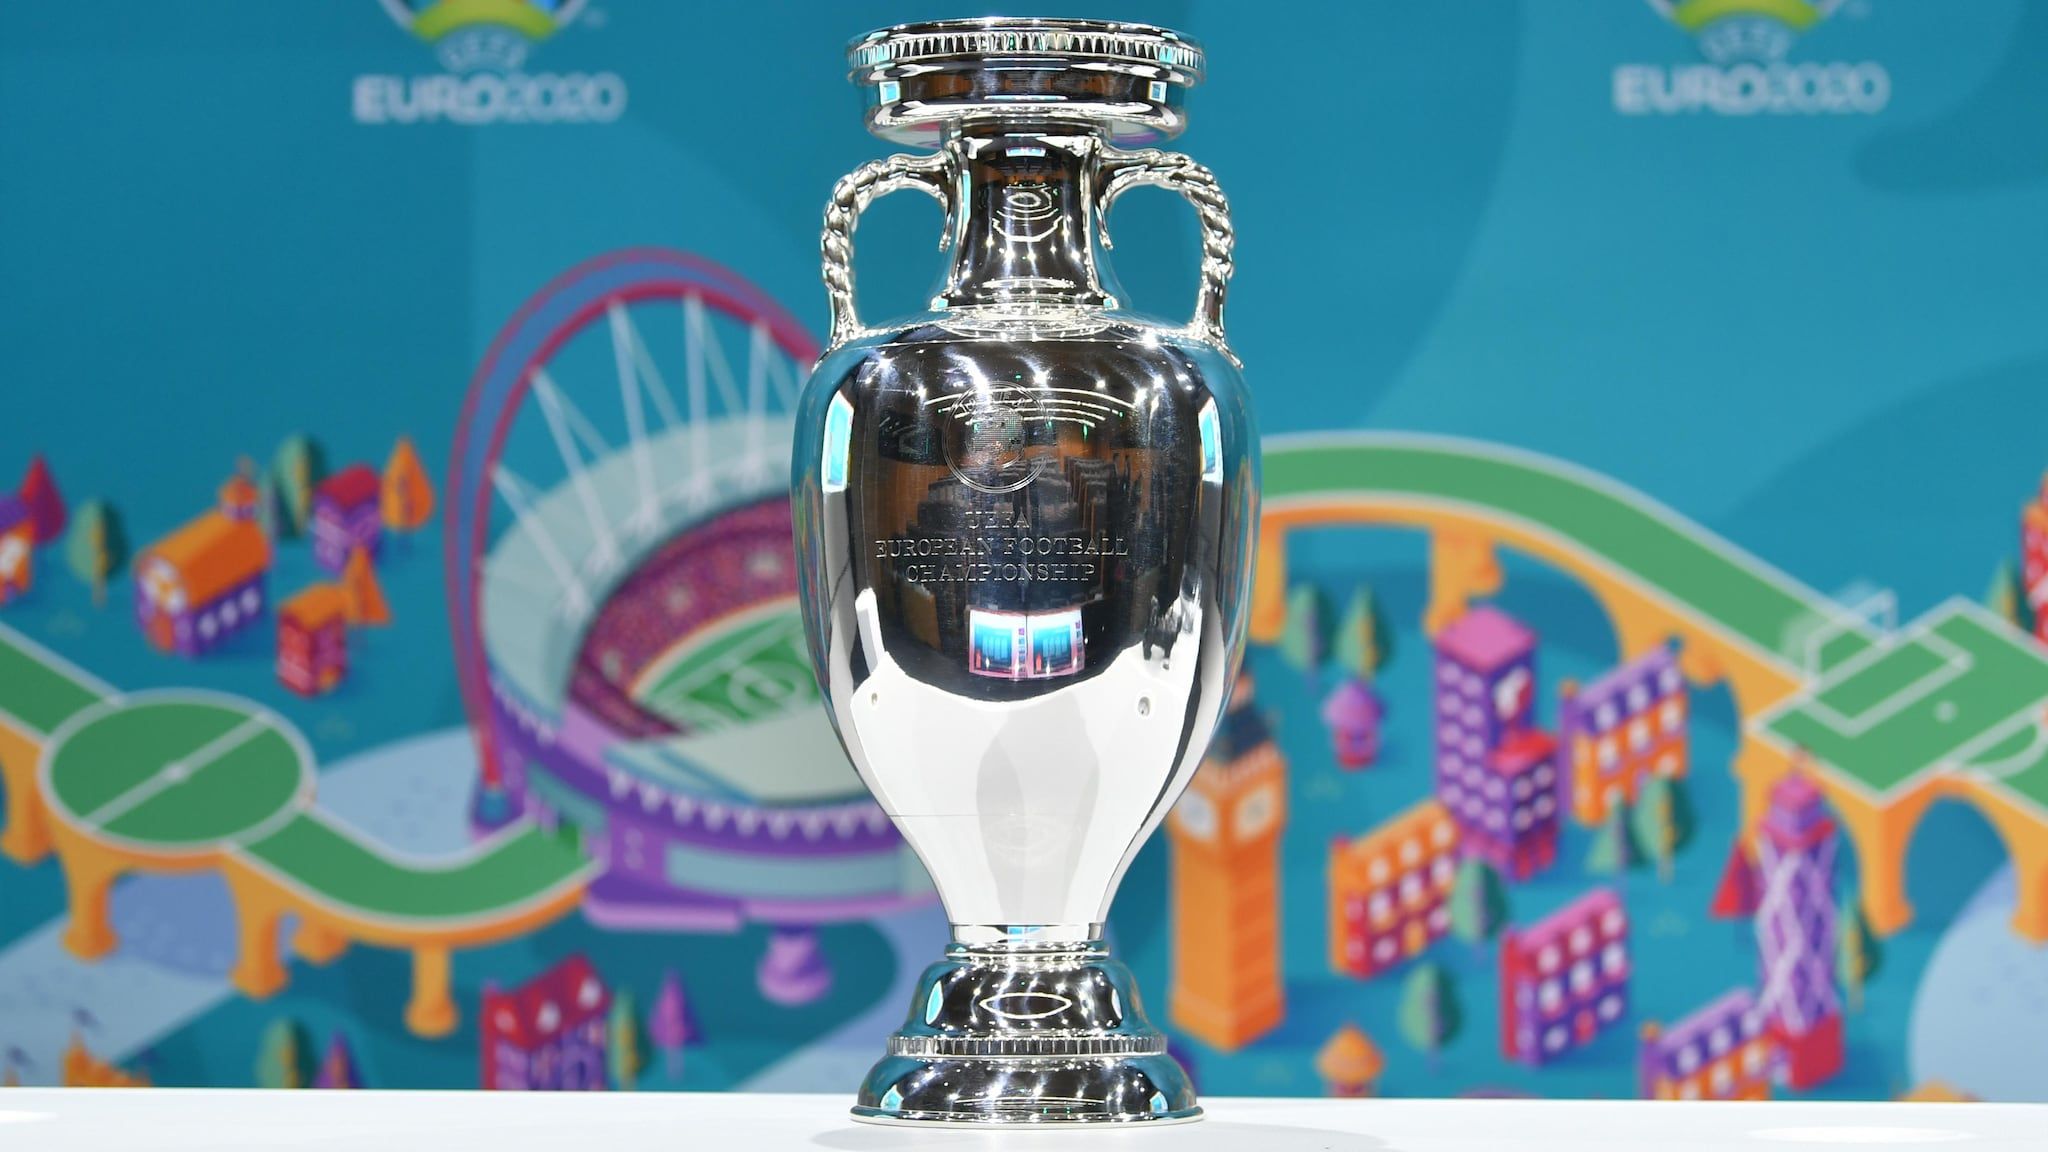 Venue changes announced for some UEFA EURO 2020 matches. UEFA EURO 2020